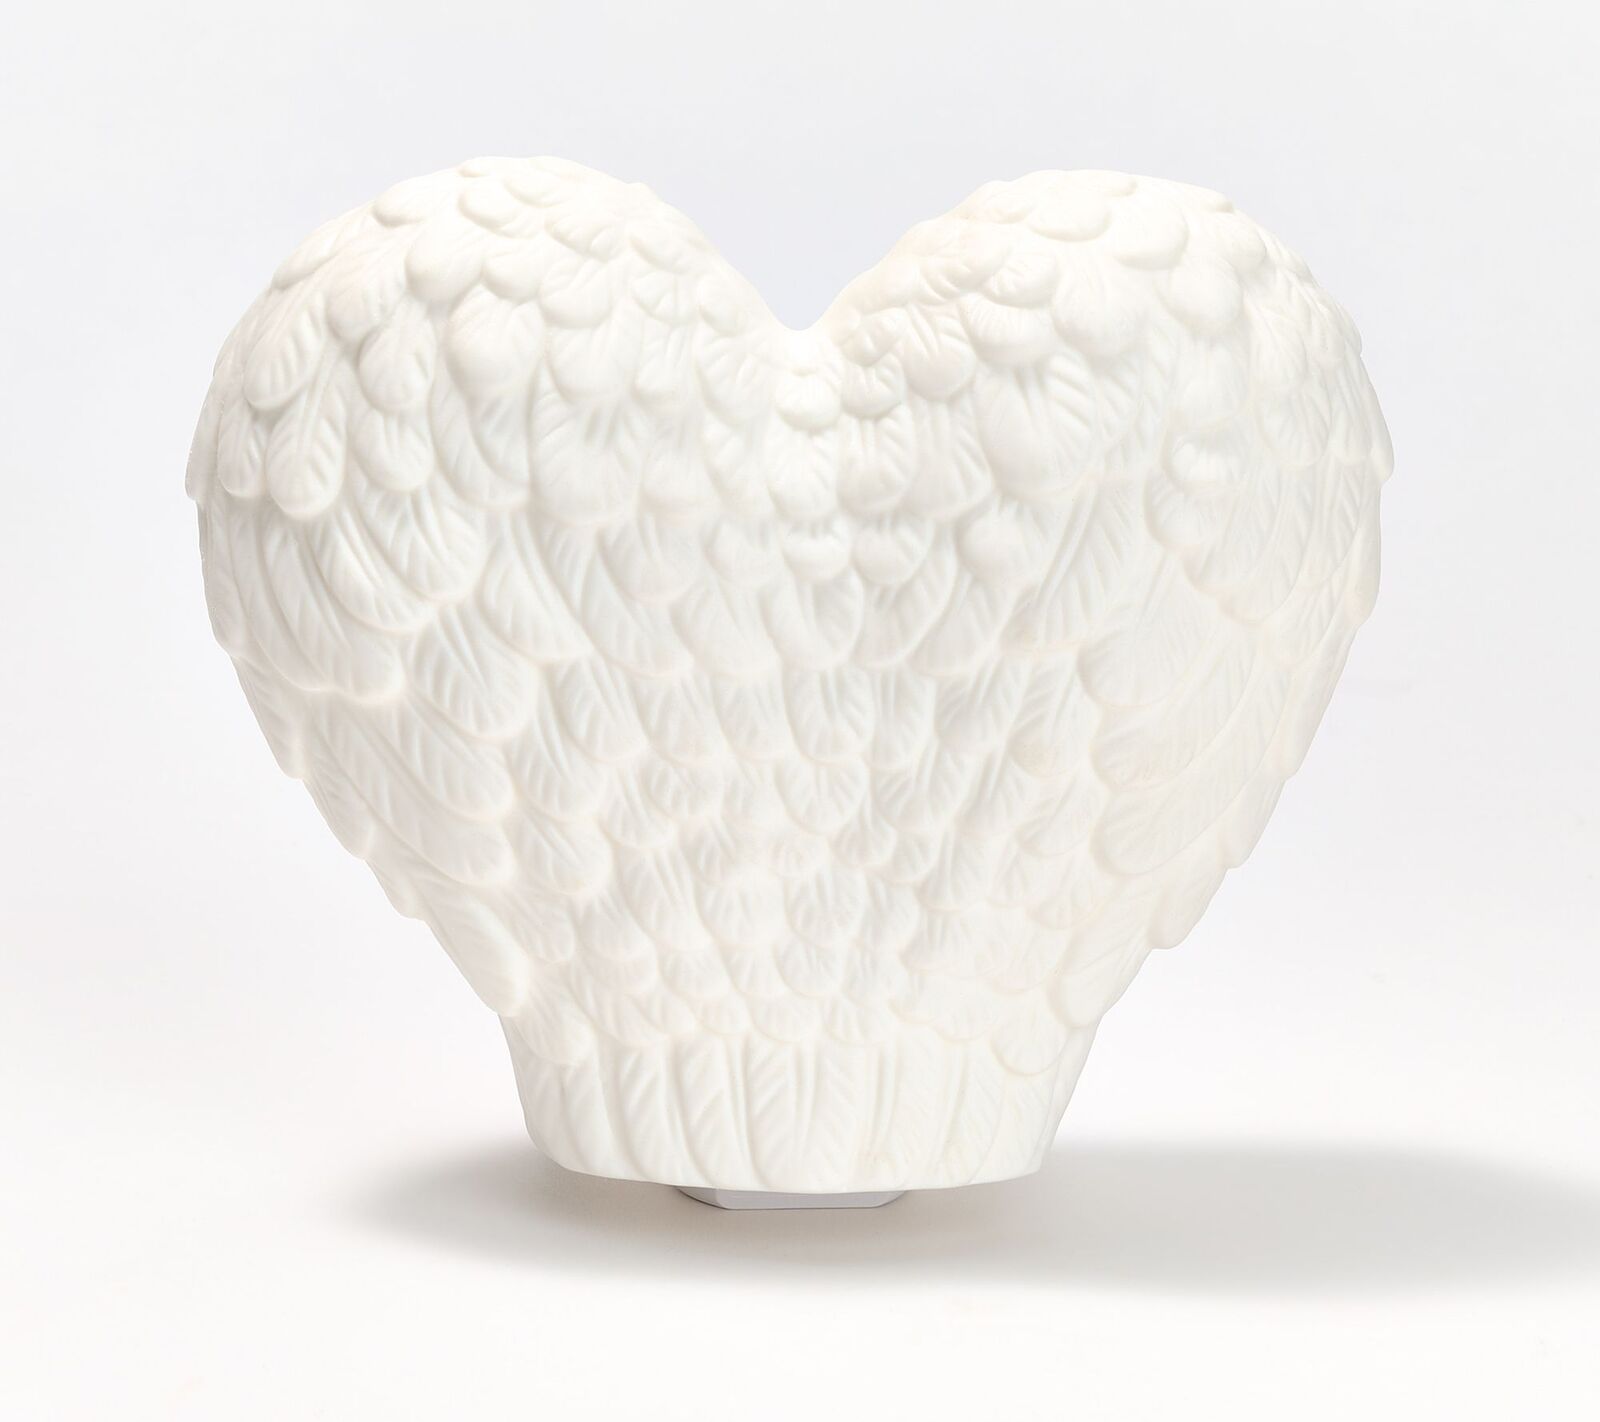 Porcelain Angel Wings Night Light with Gift Box by Valerie